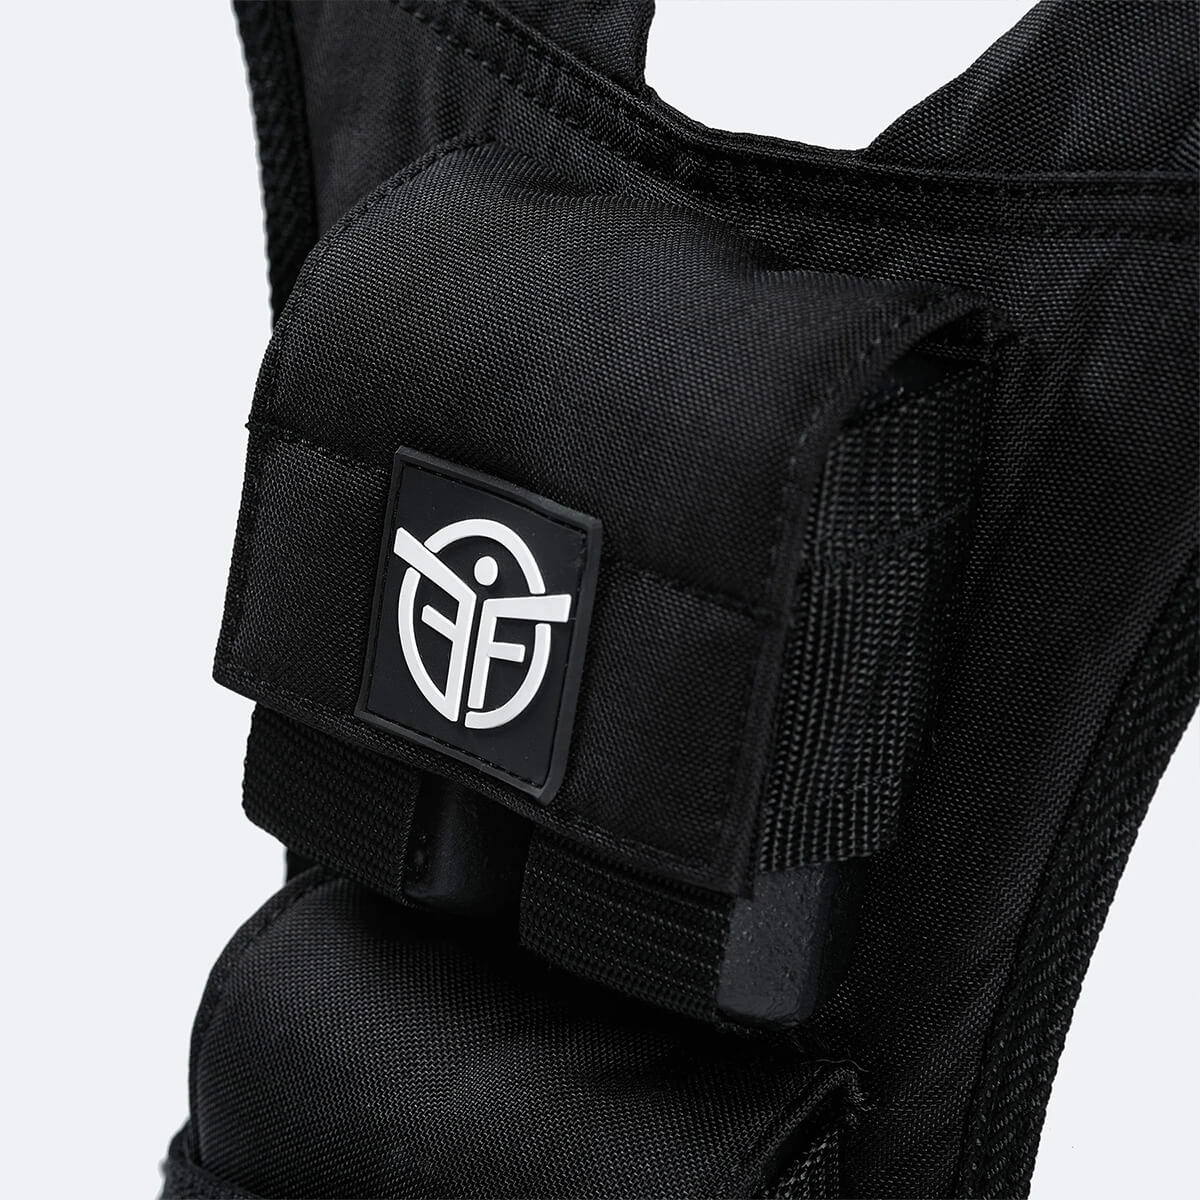 weighted vest eric flag 10kg